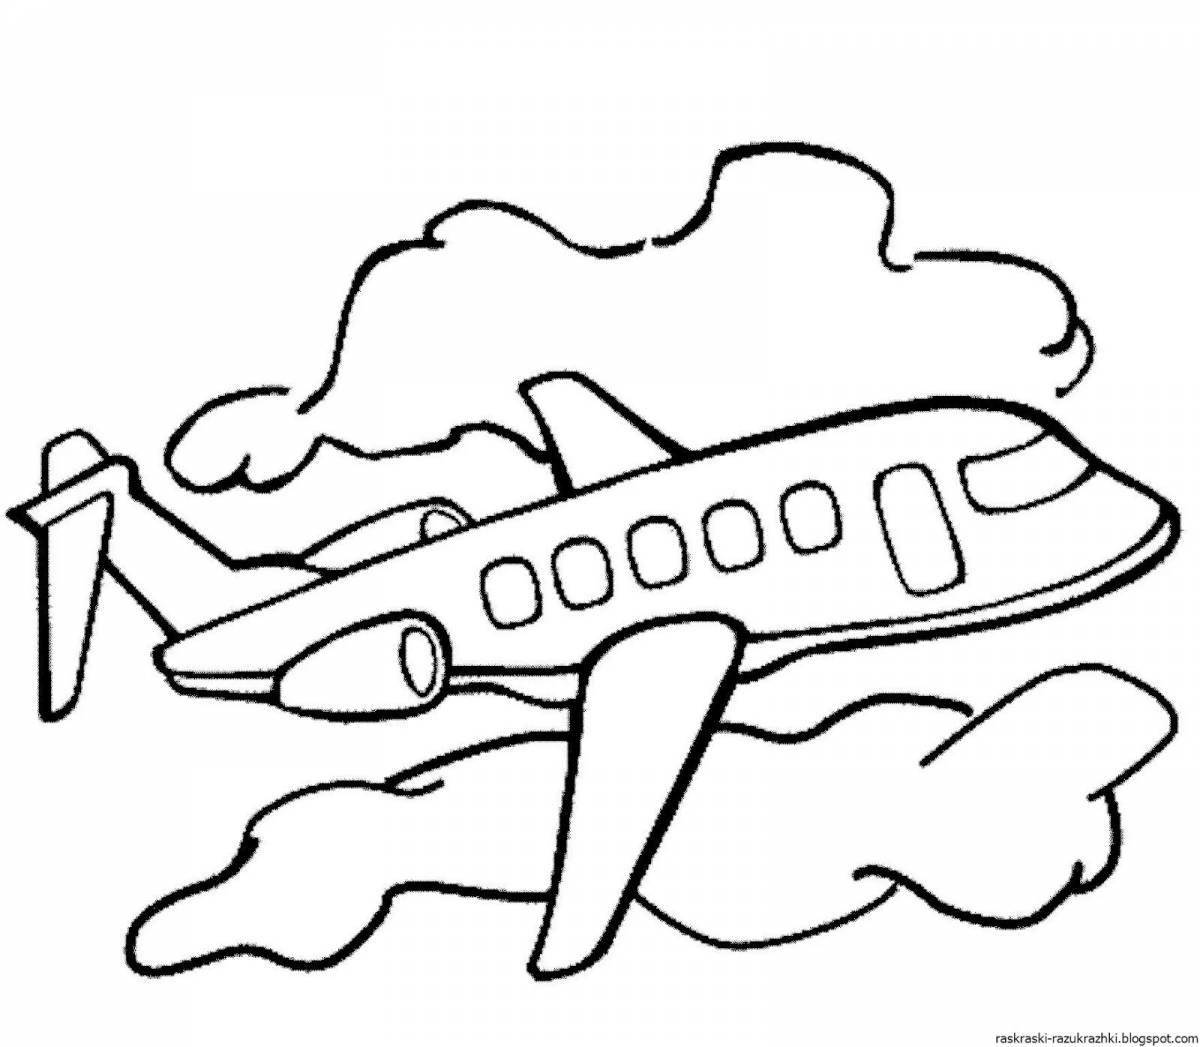 Air transport coloring book for children 6-7 years old